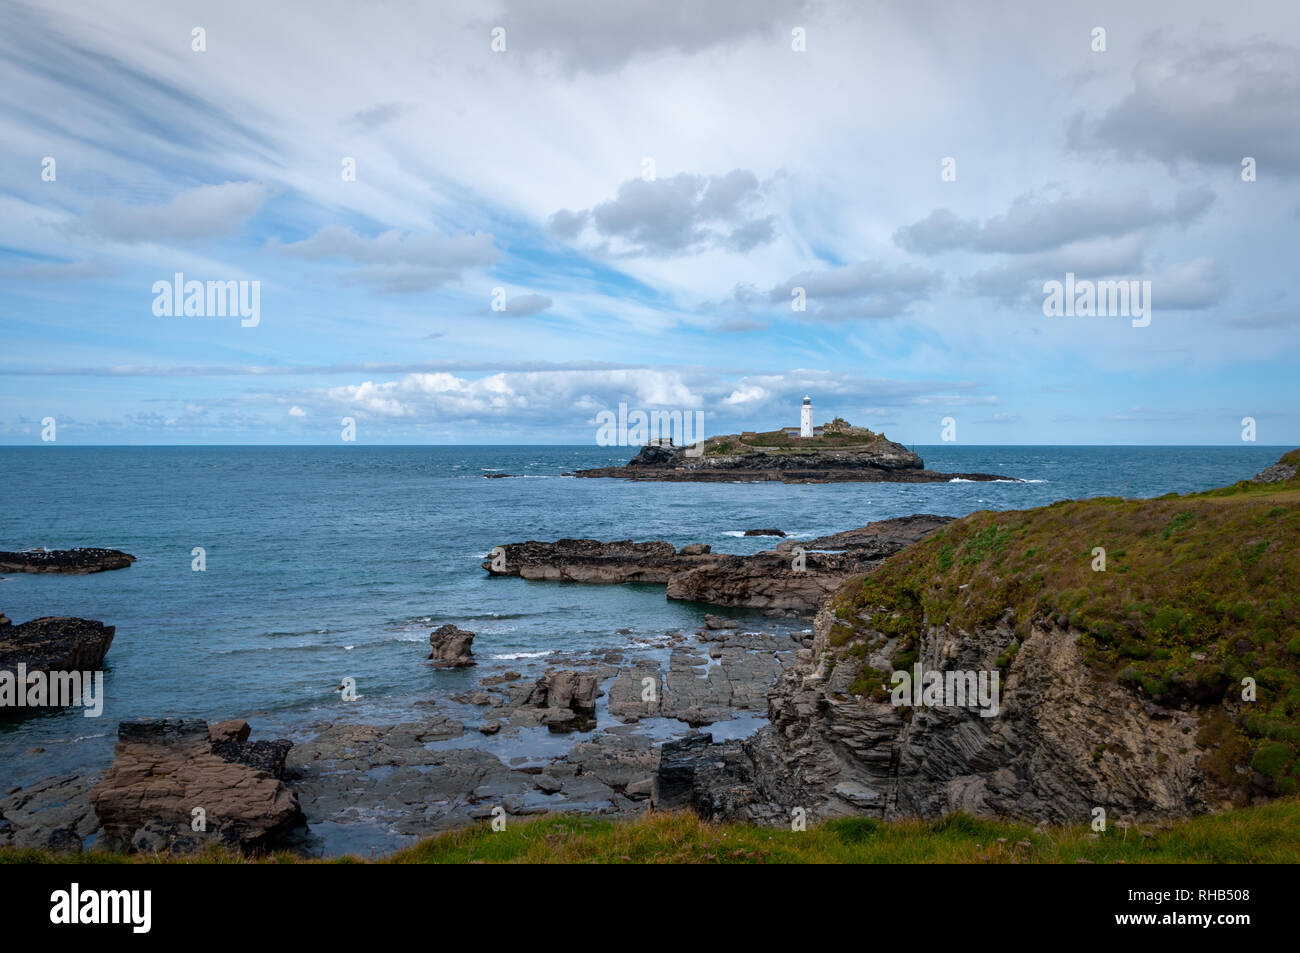 Looking towards the Godrevy Lighthouse in Cornwall, UK. Stock Photo